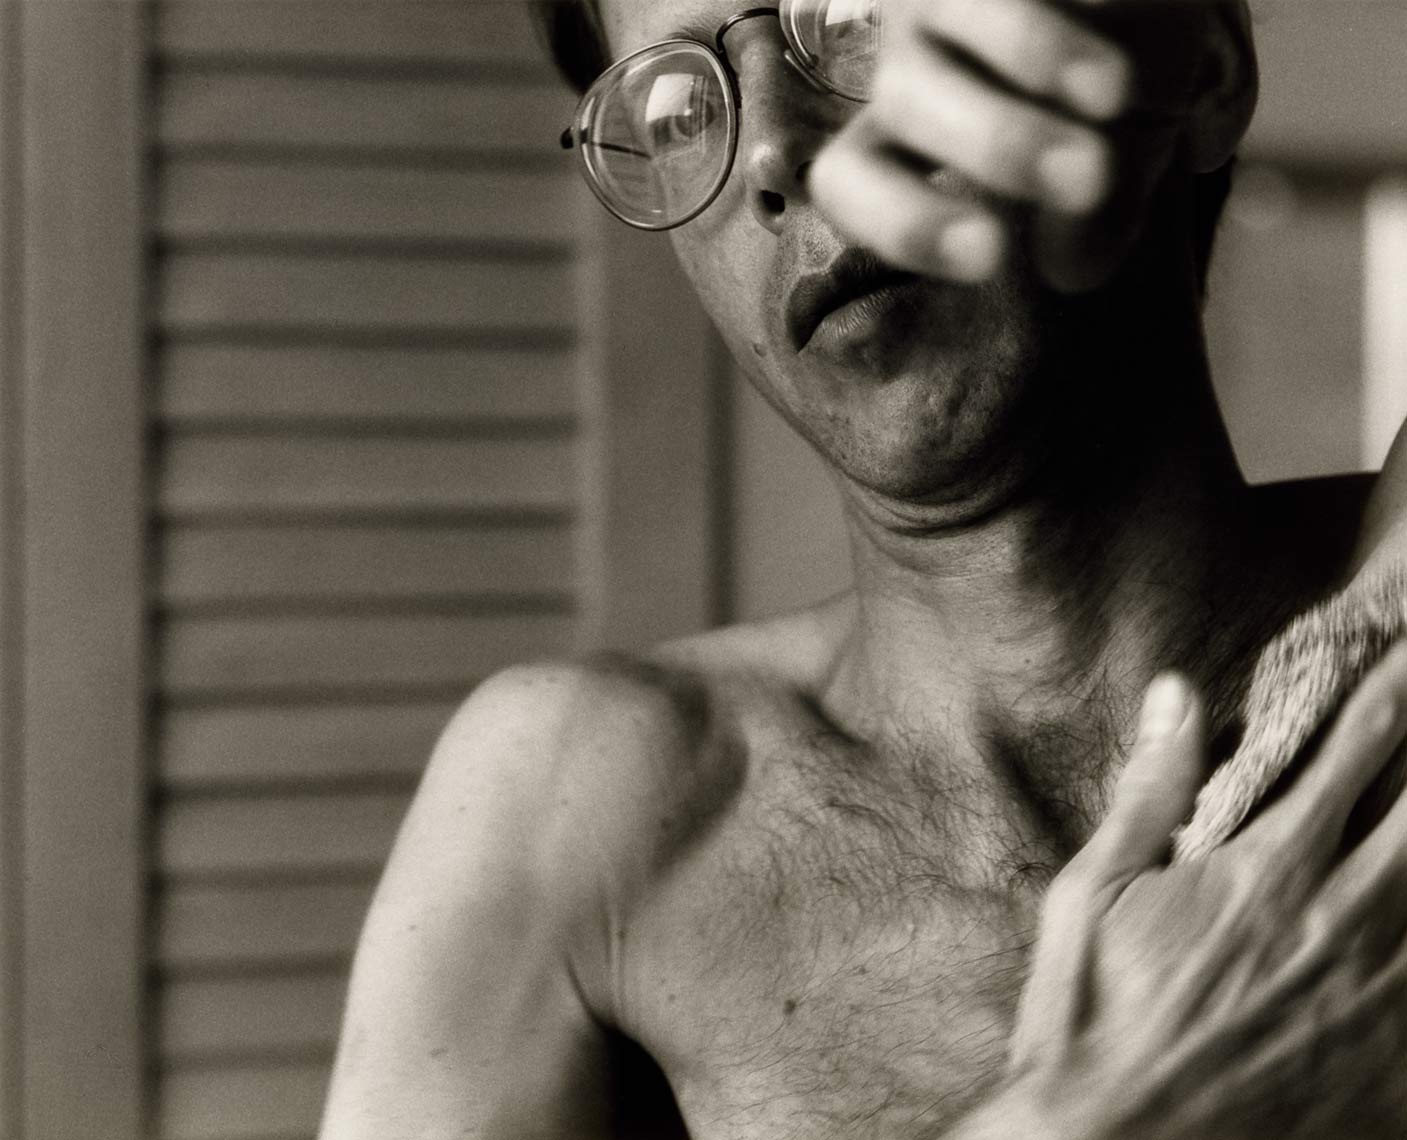 David Lebe; Morning Ritual 21, 1994, black and white photograph about living with AIDS